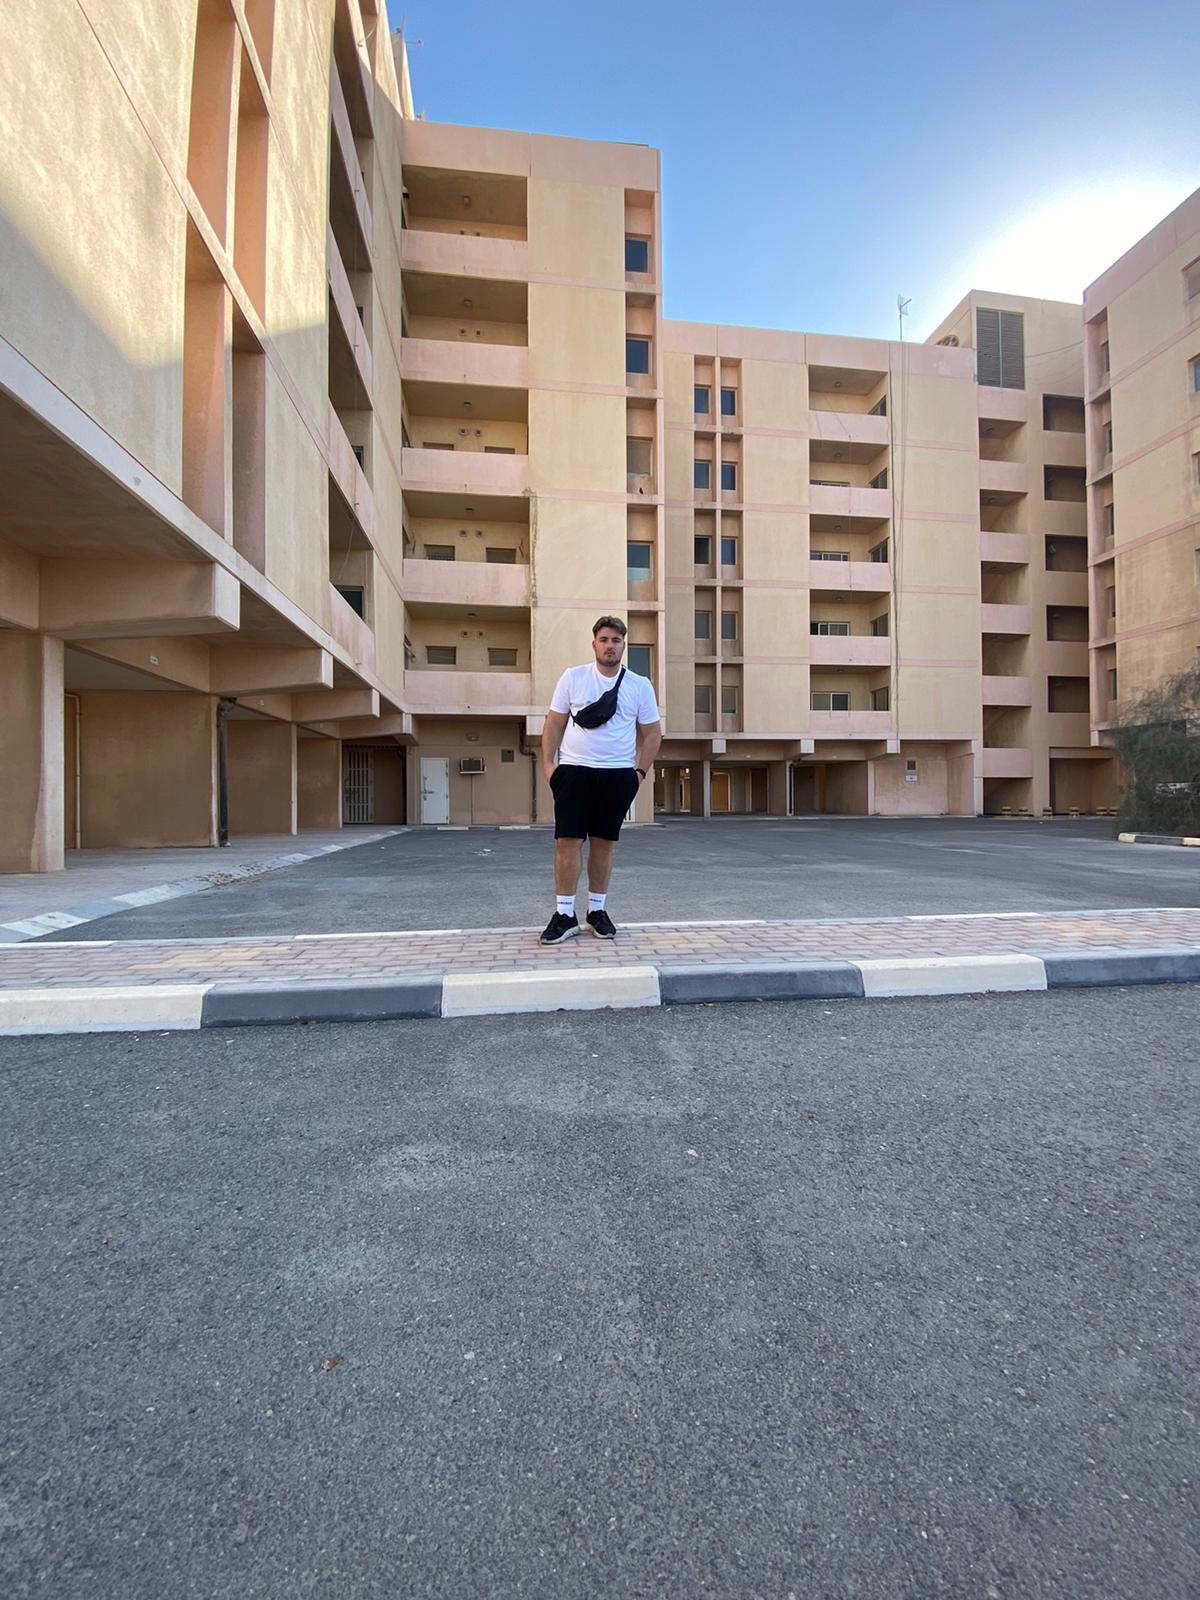 World Cup fan discovers ‘eerie’ abandoned city in Qatar